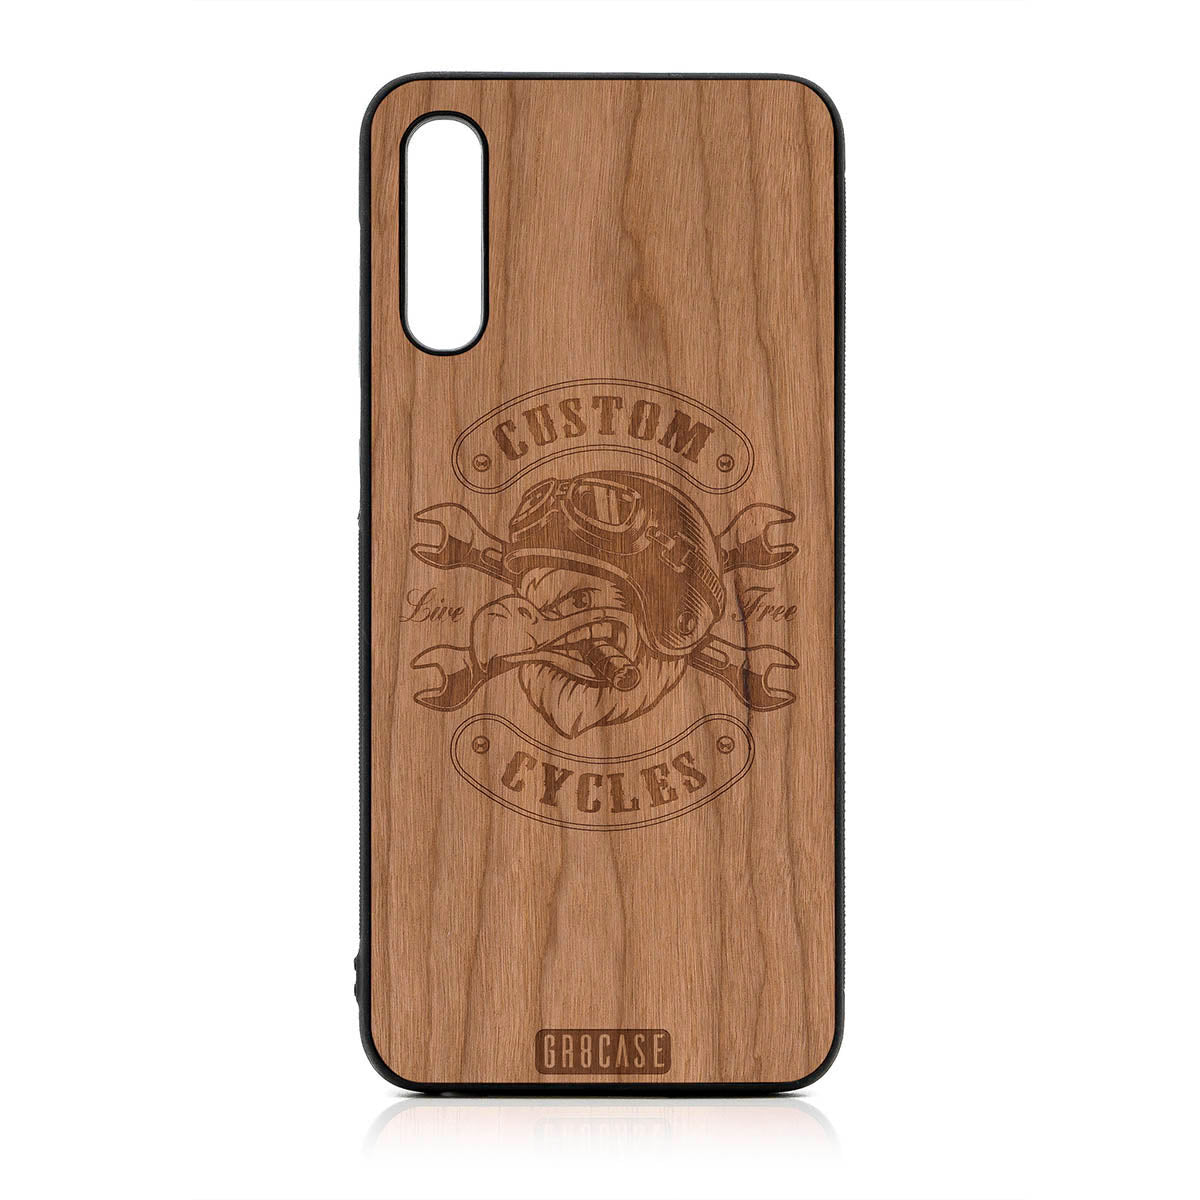 Custom Cycles Live Free (Biker Eagle) Design Wood Case For Samsung Galaxy A50 by GR8CASE